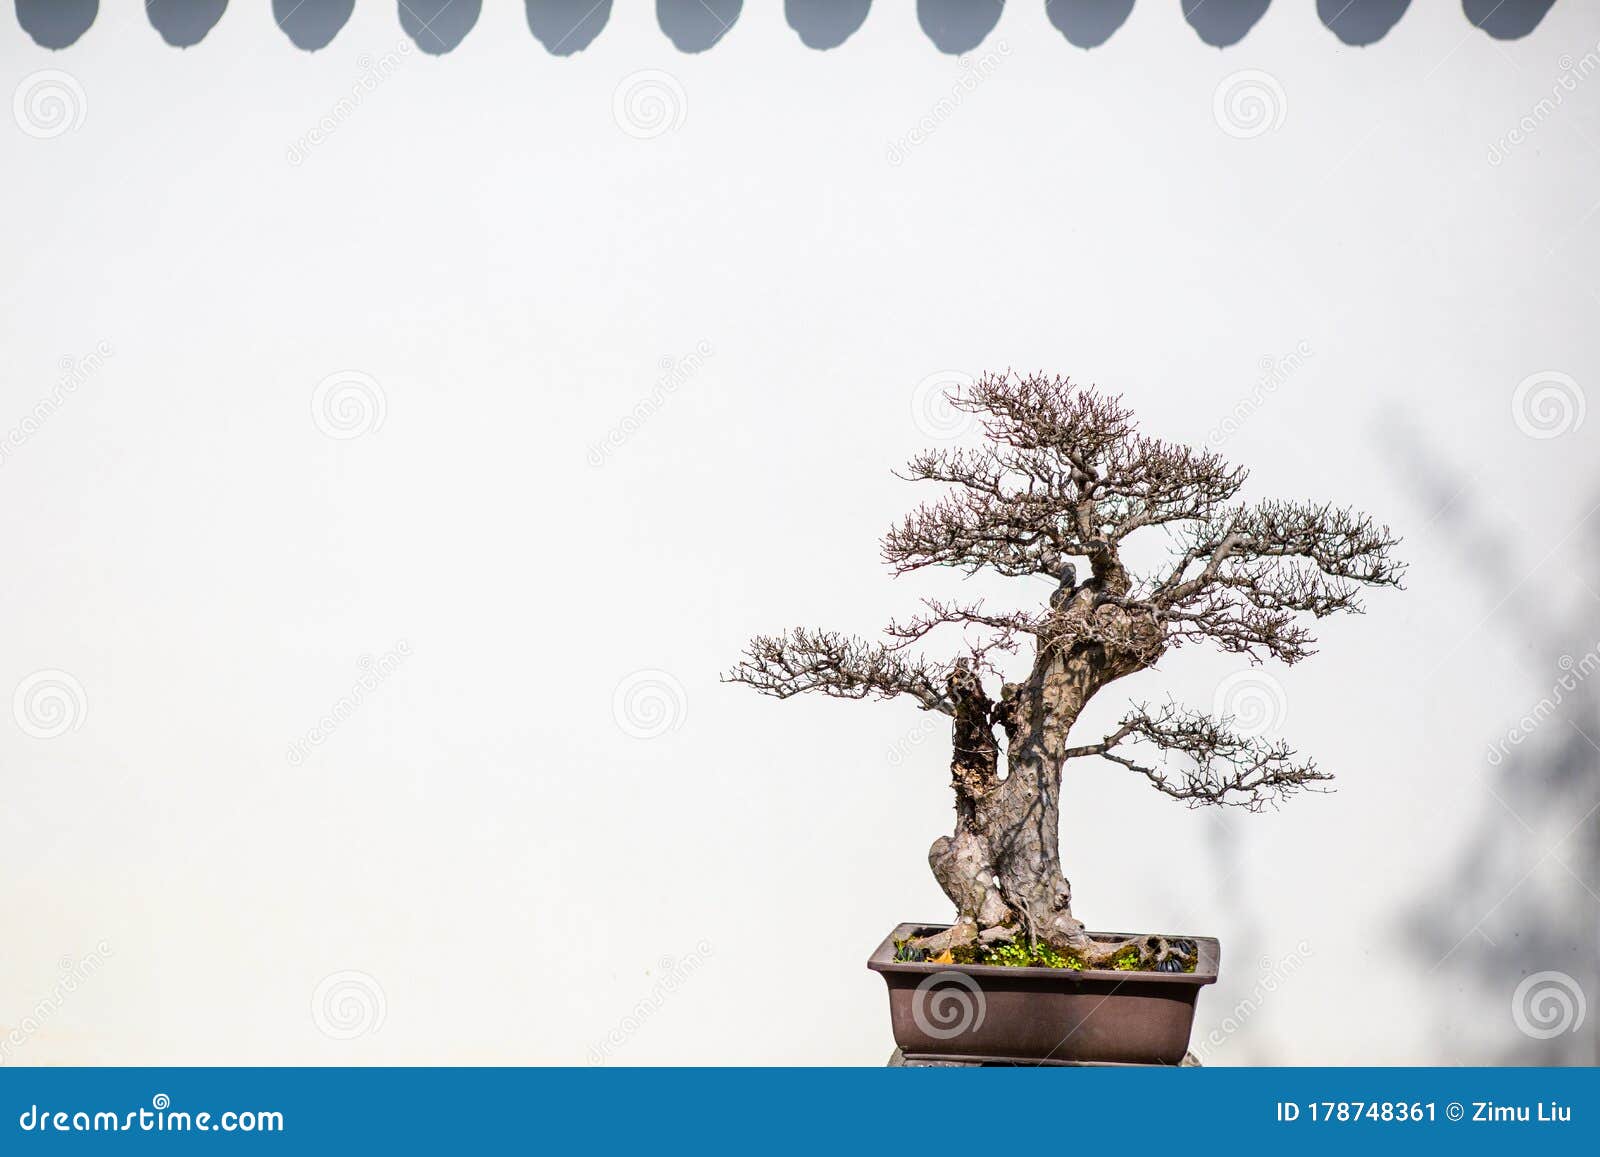 Chinese Bonsai In A Garden Stock Image Image Of Rocks 178748361